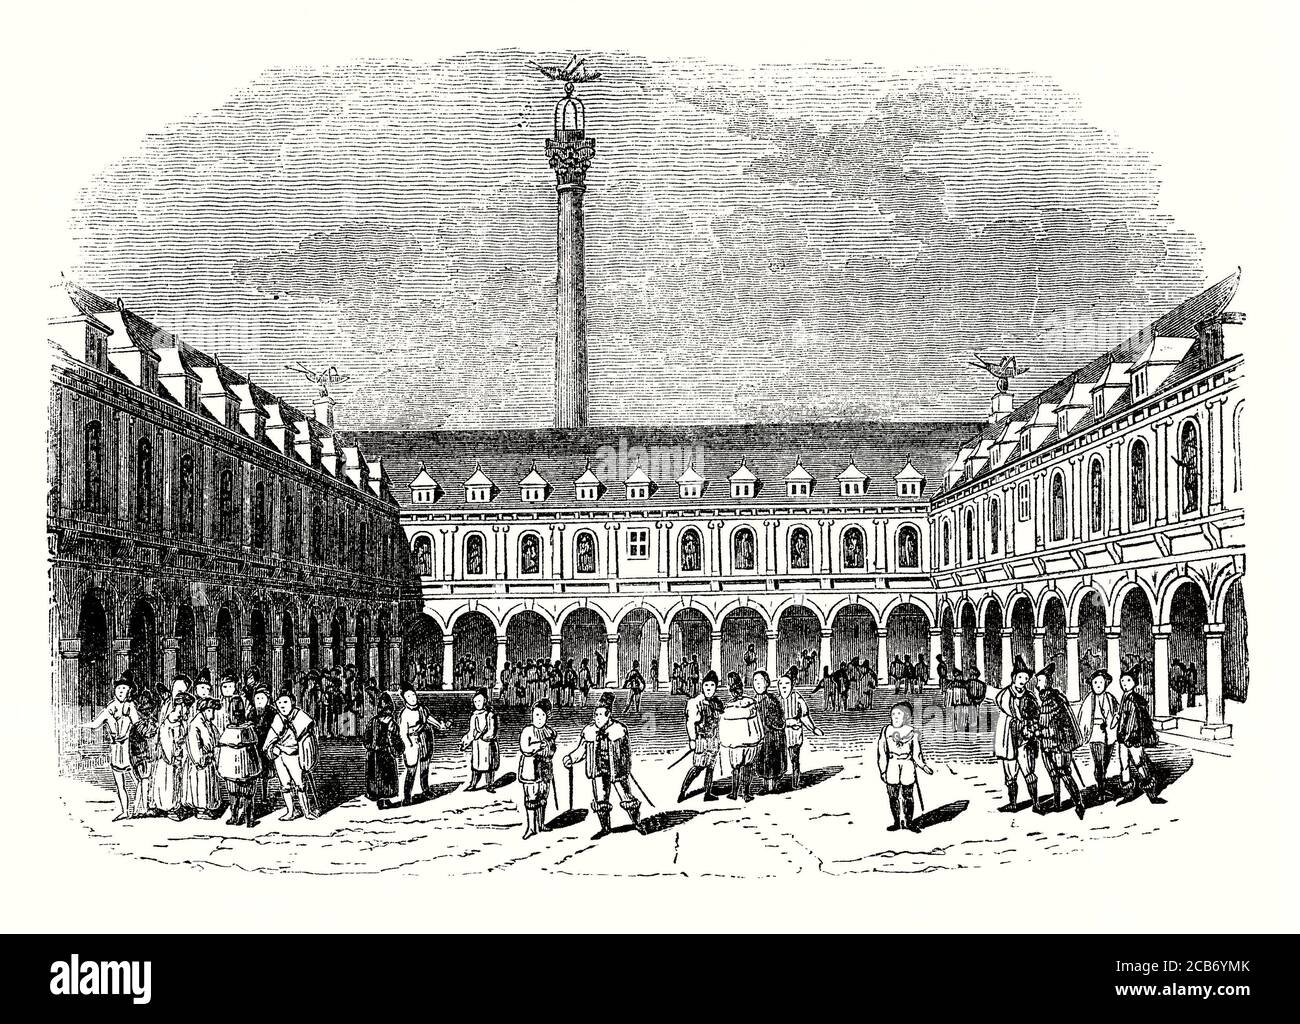 An old engraving of The Royal Exchange in London in the City of London, England, UK c. 1600. It was founded in the 16th century by the merchant Sir Thomas Gresham on the suggestion of his factor Richard Clough to act as a centre of commerce for the city. It is on the corner of Cornhill and Threadneedle Street. It was Britain's first specialist commercial building and was officially opened in 1571 by Queen Elizabeth I, who awarded the building its royal status. Only the exchange of goods was allowed until the 17th century. The original Exchange was destroyed in the Great Fire of London in 1666. Stock Photo